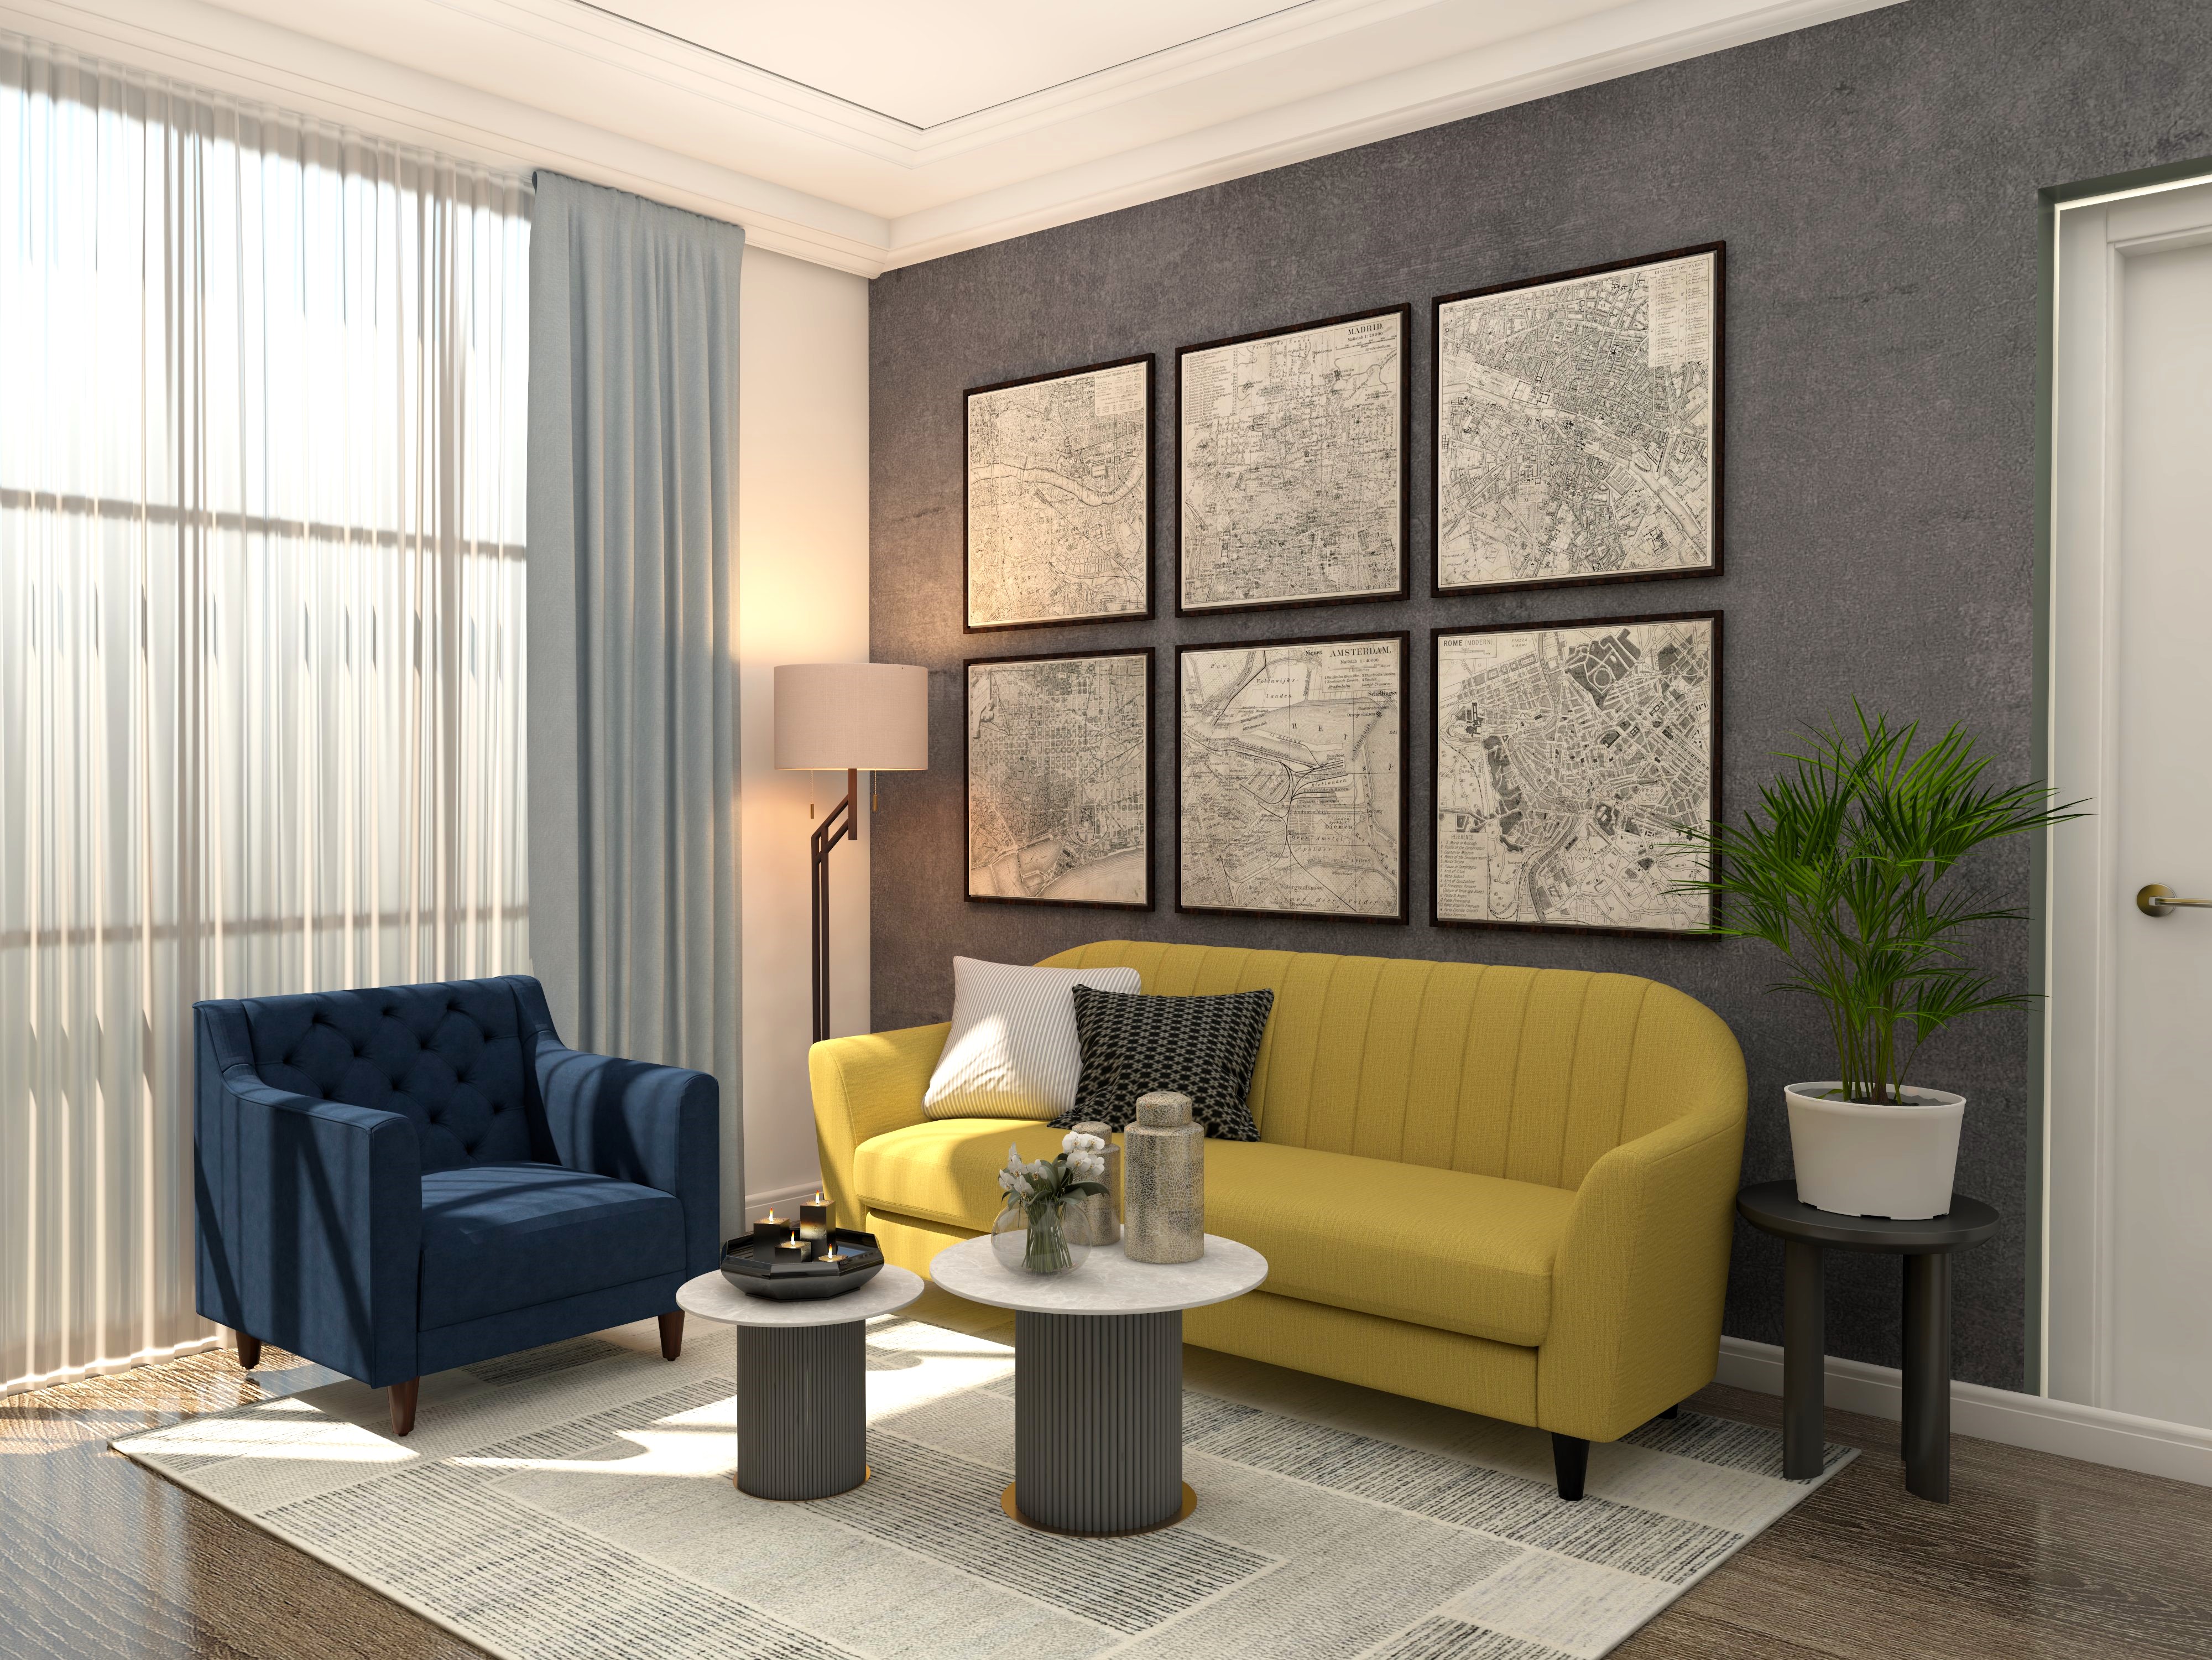 Grey textured paint with yellow 3-seater sofa and blue chair in living room-Beautiful Homes